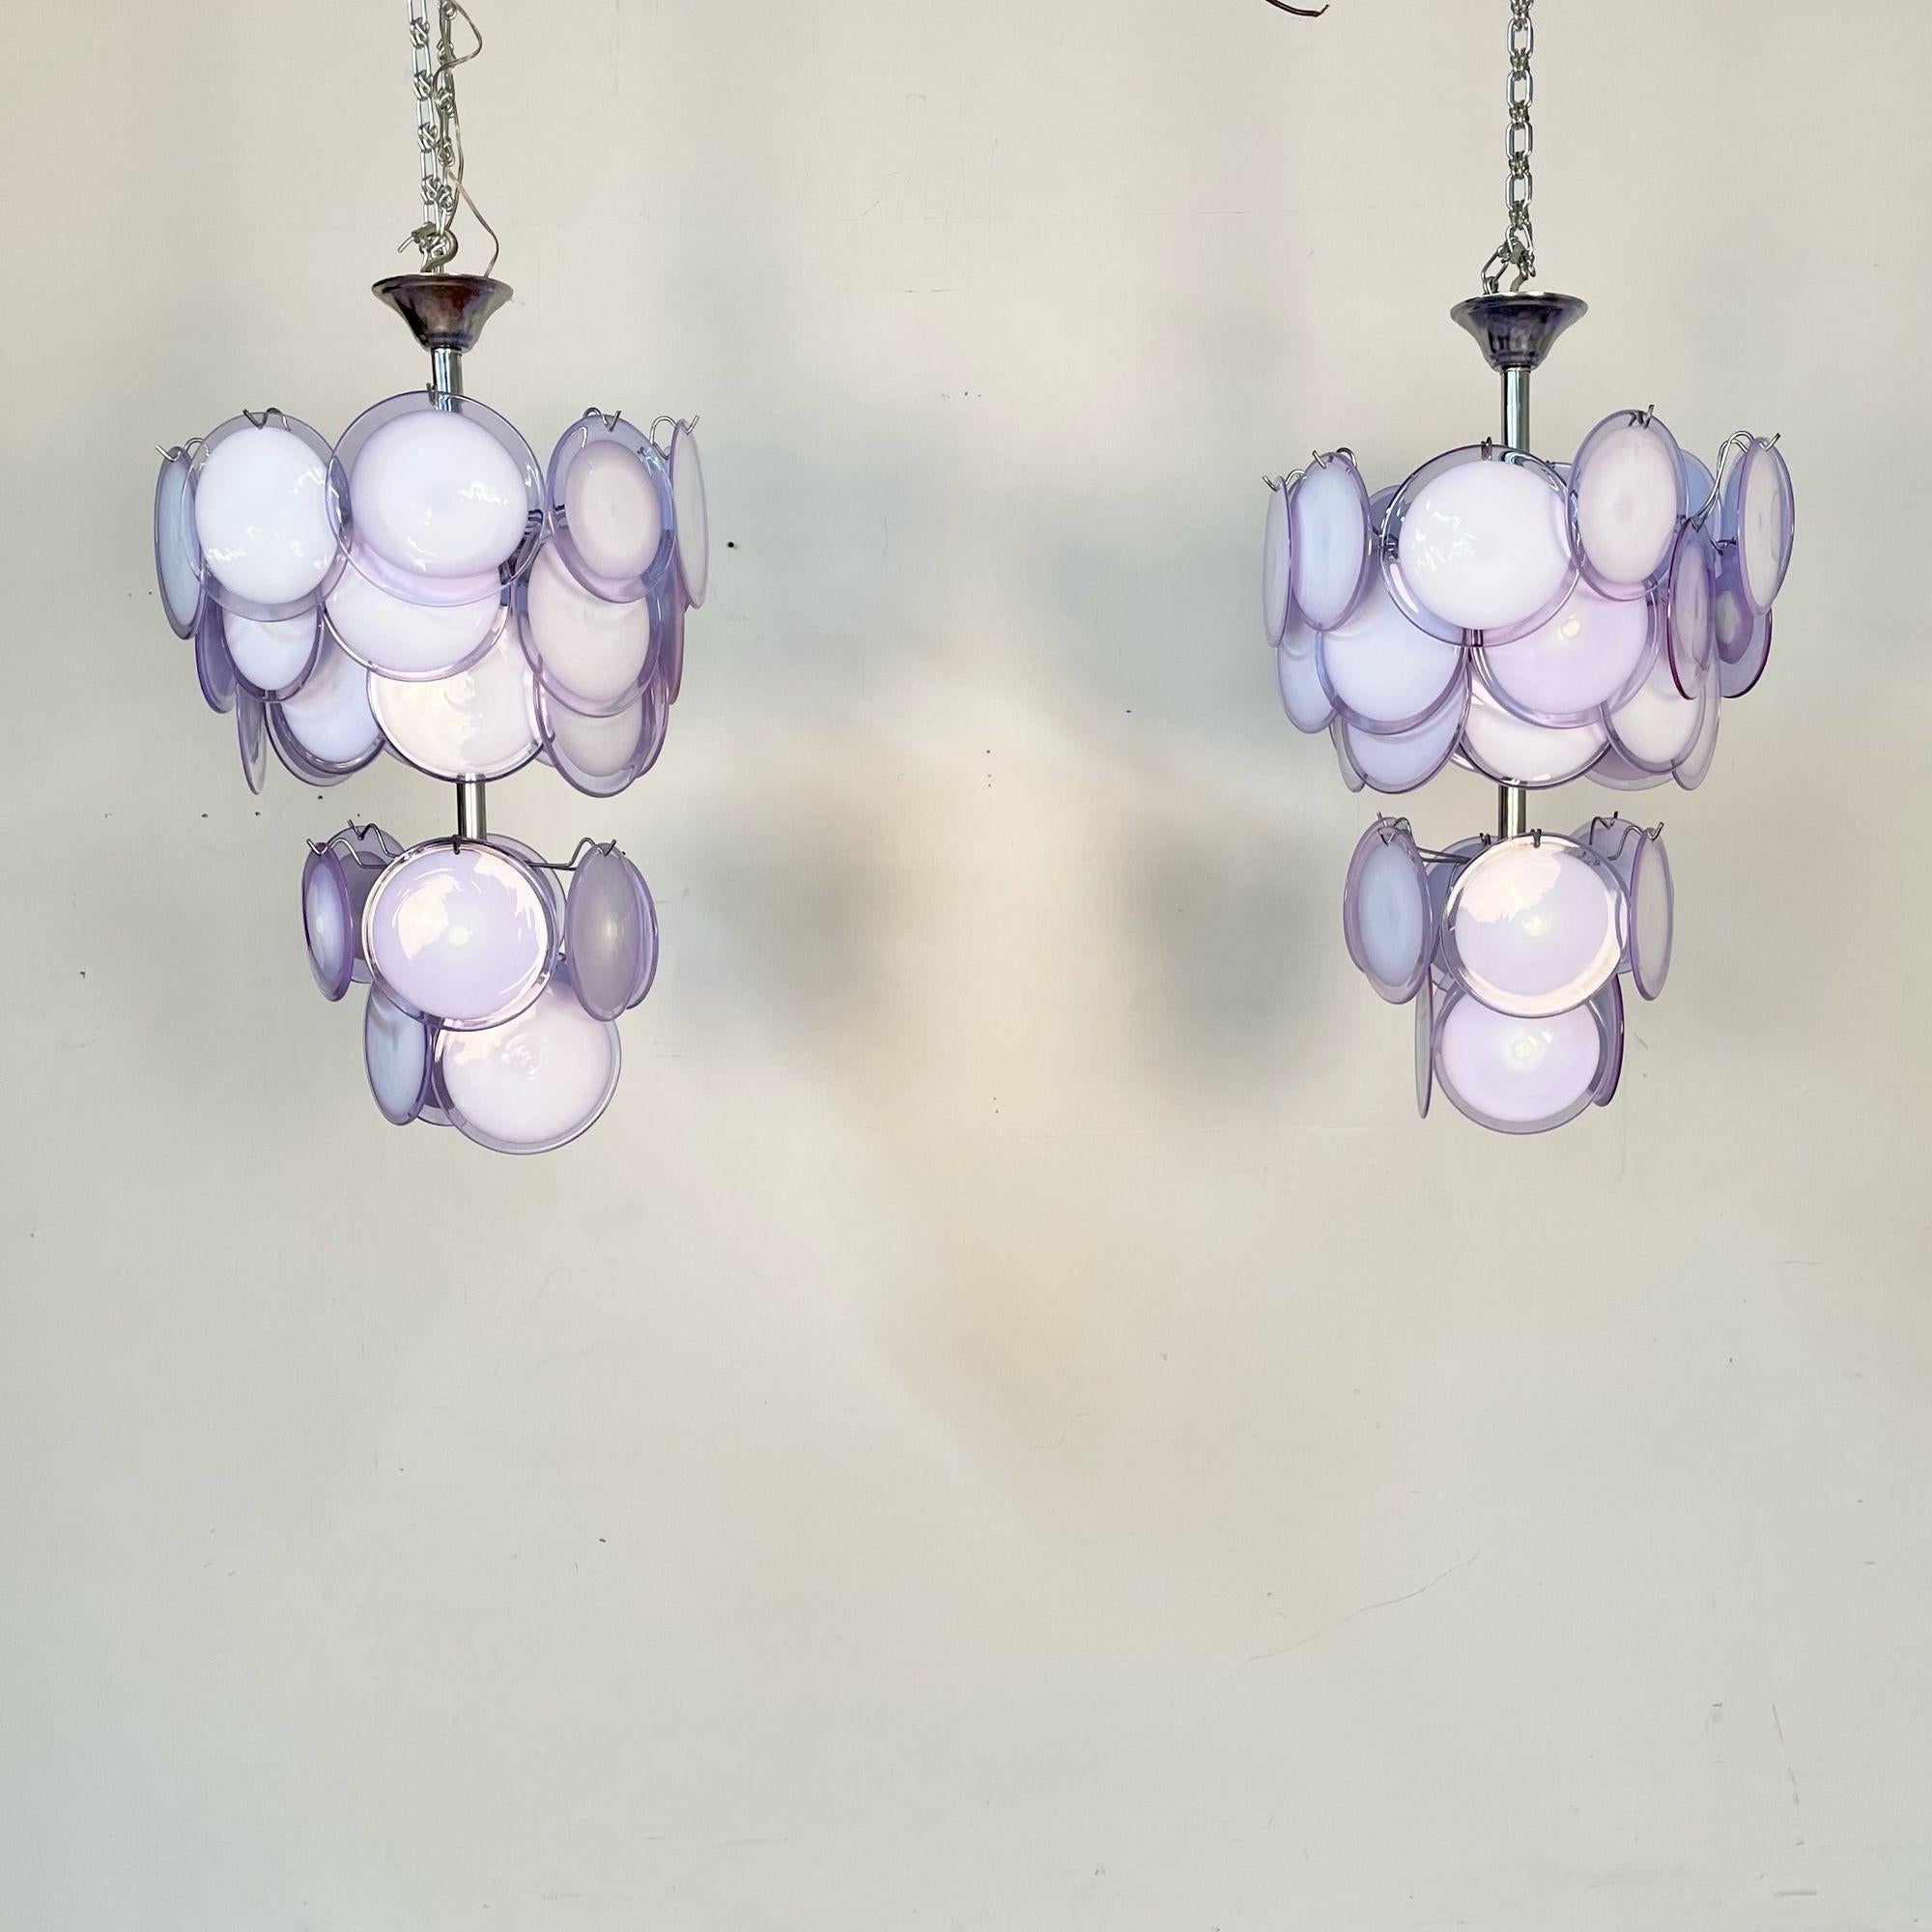 Pair of Mid-Century Modern Style Purple Murano Glass Disk Chandeliers
A pair of mid-century modern Murano glass chandeliers in a classic suspended disks configuration. Each fixture has 18 translucent purple over white Murano glass disks mounted on a